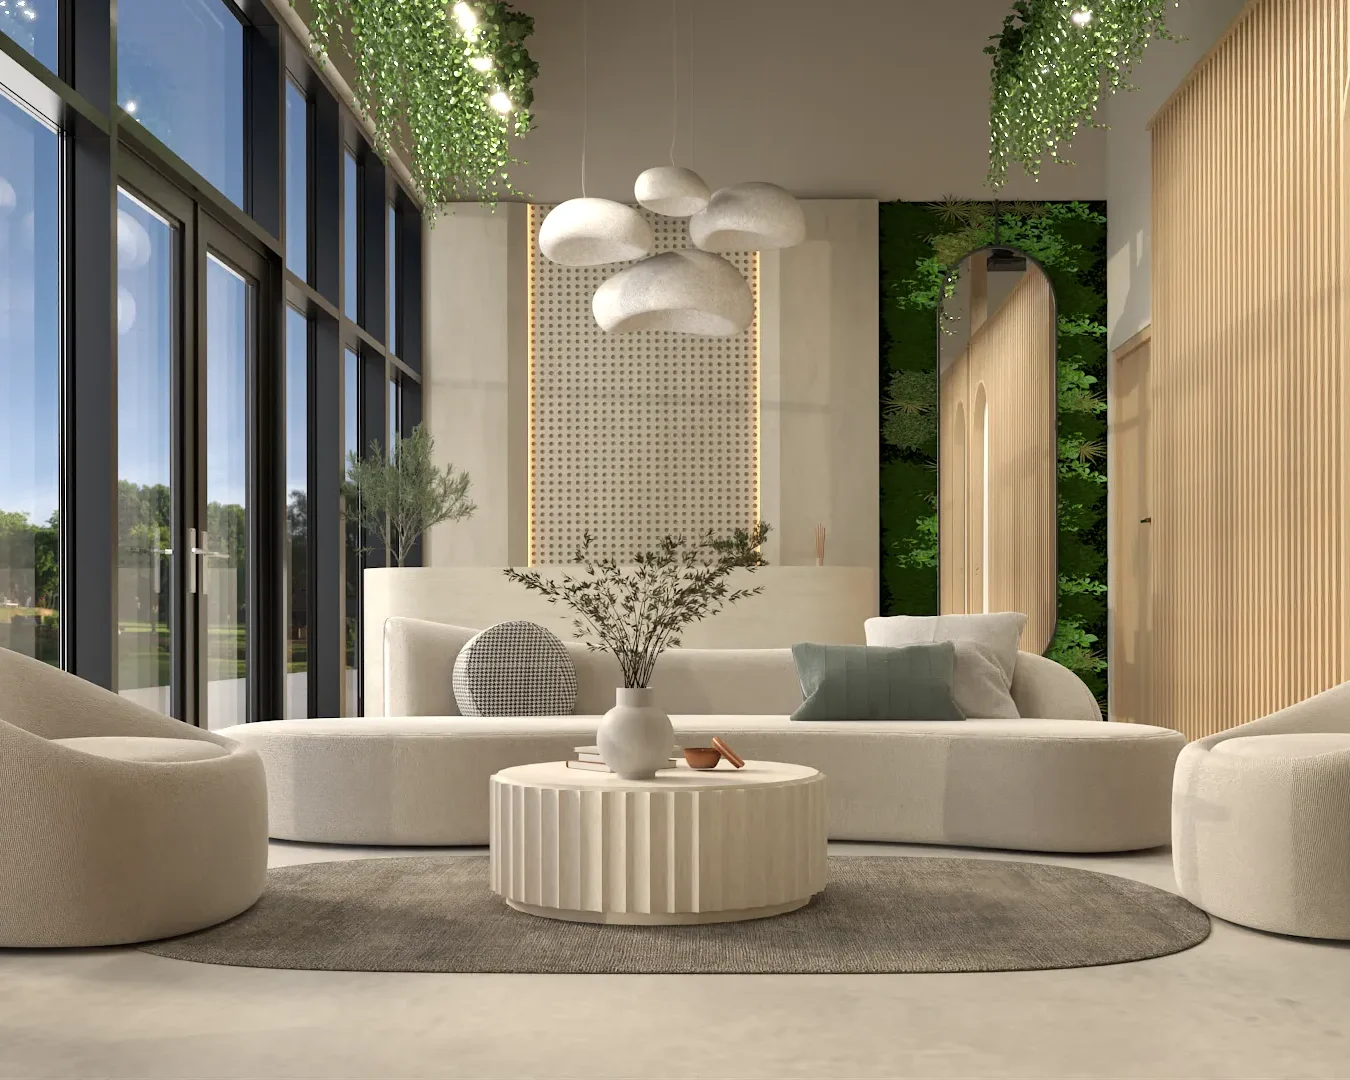 A contemporary living room featuring a cozy seating arrangement, hanging green plants, and artistic light fixtures. The space is designed with neutral tones and a touch of greenery. Design by Debora, an online interior design service.